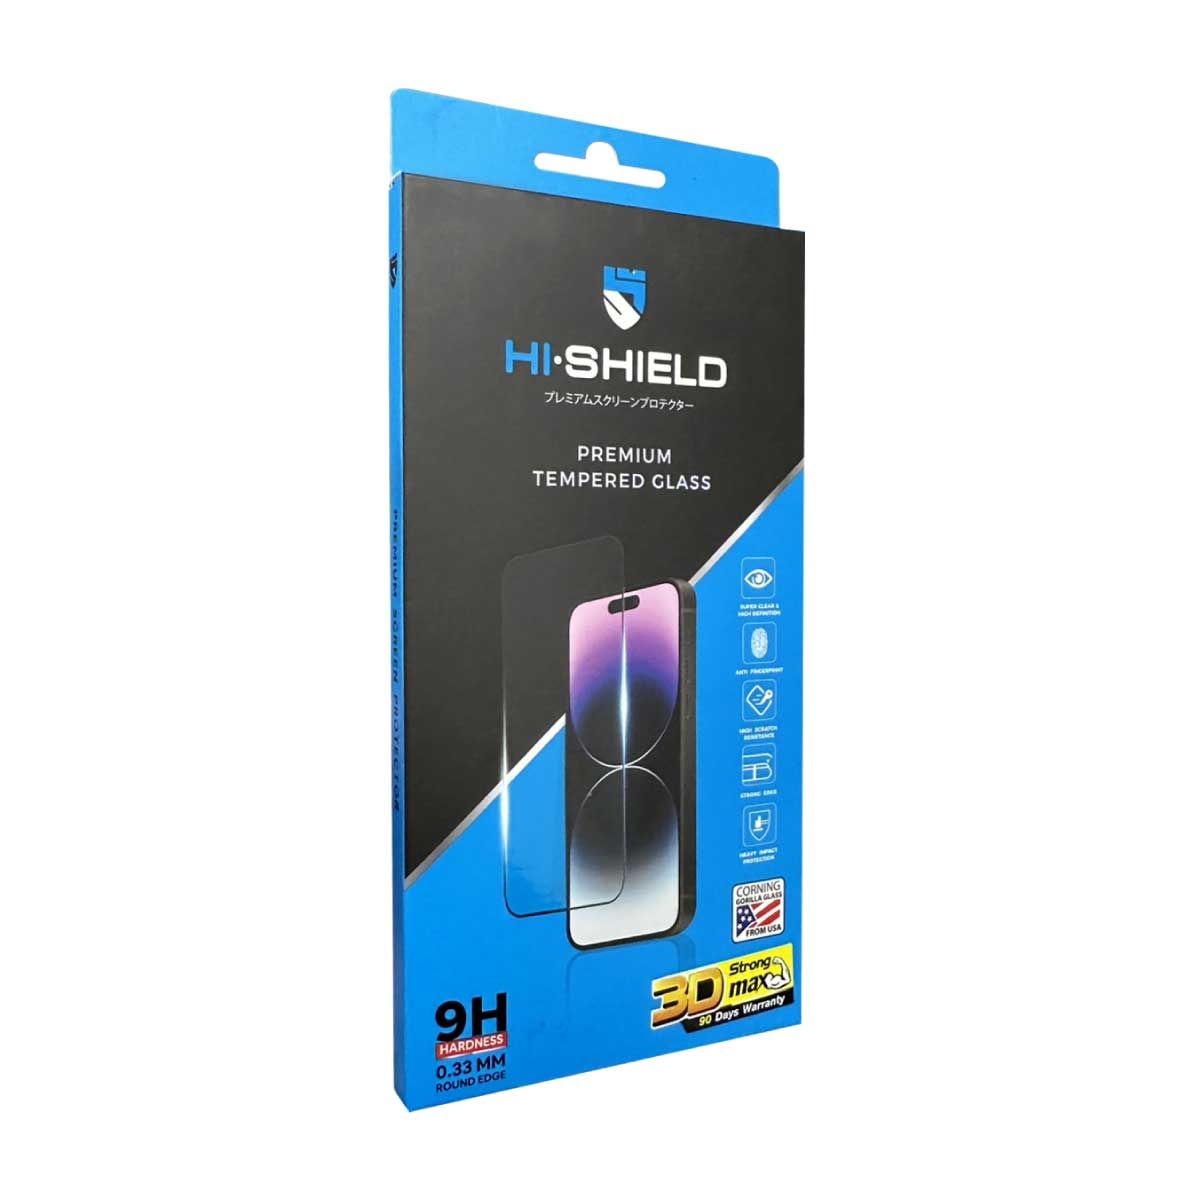 Hi-Shield TG 3D Strong Max for iPhone15ProMax